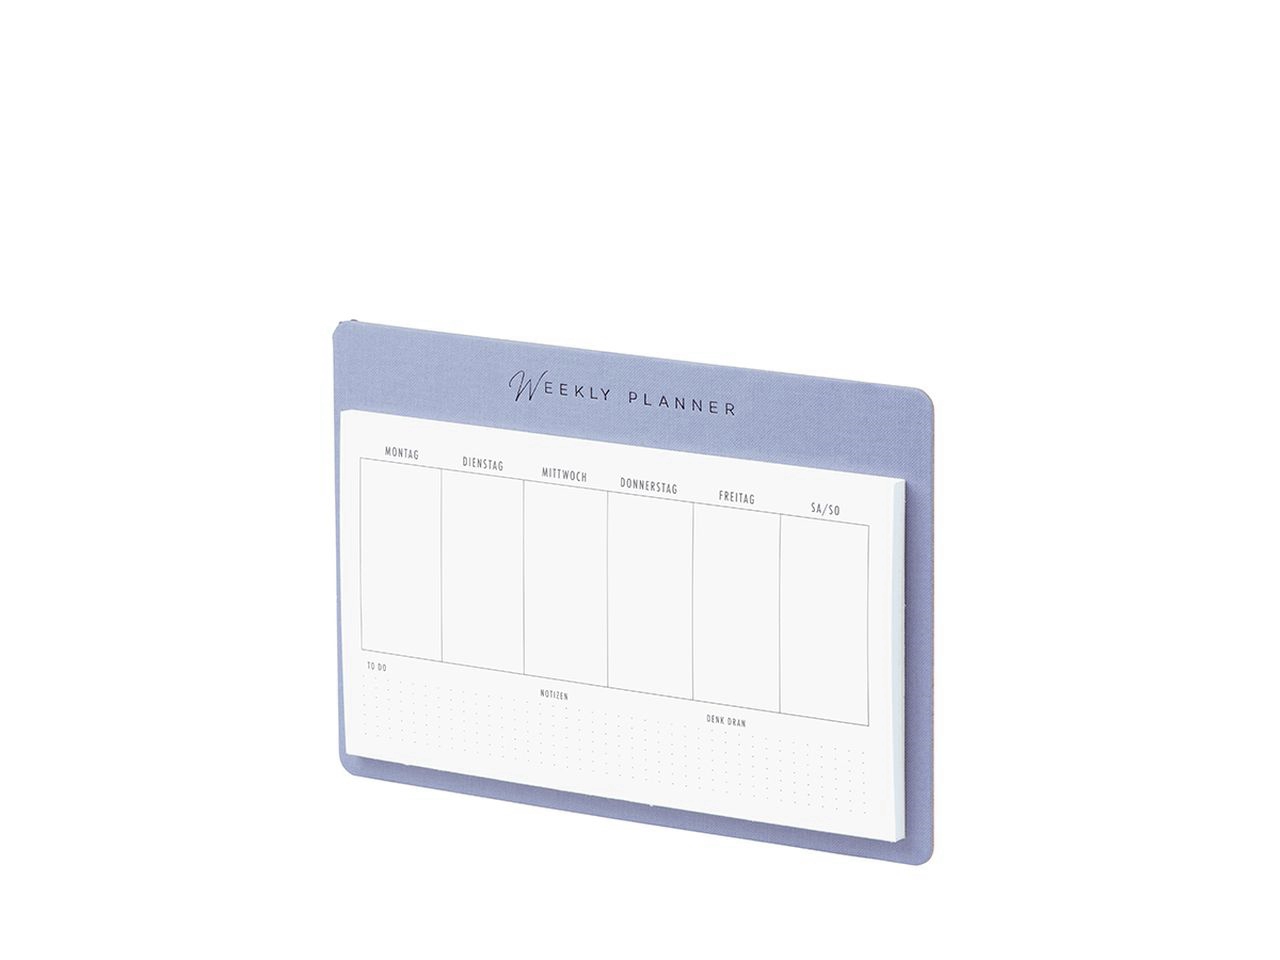 Weekly planner 240x135mm